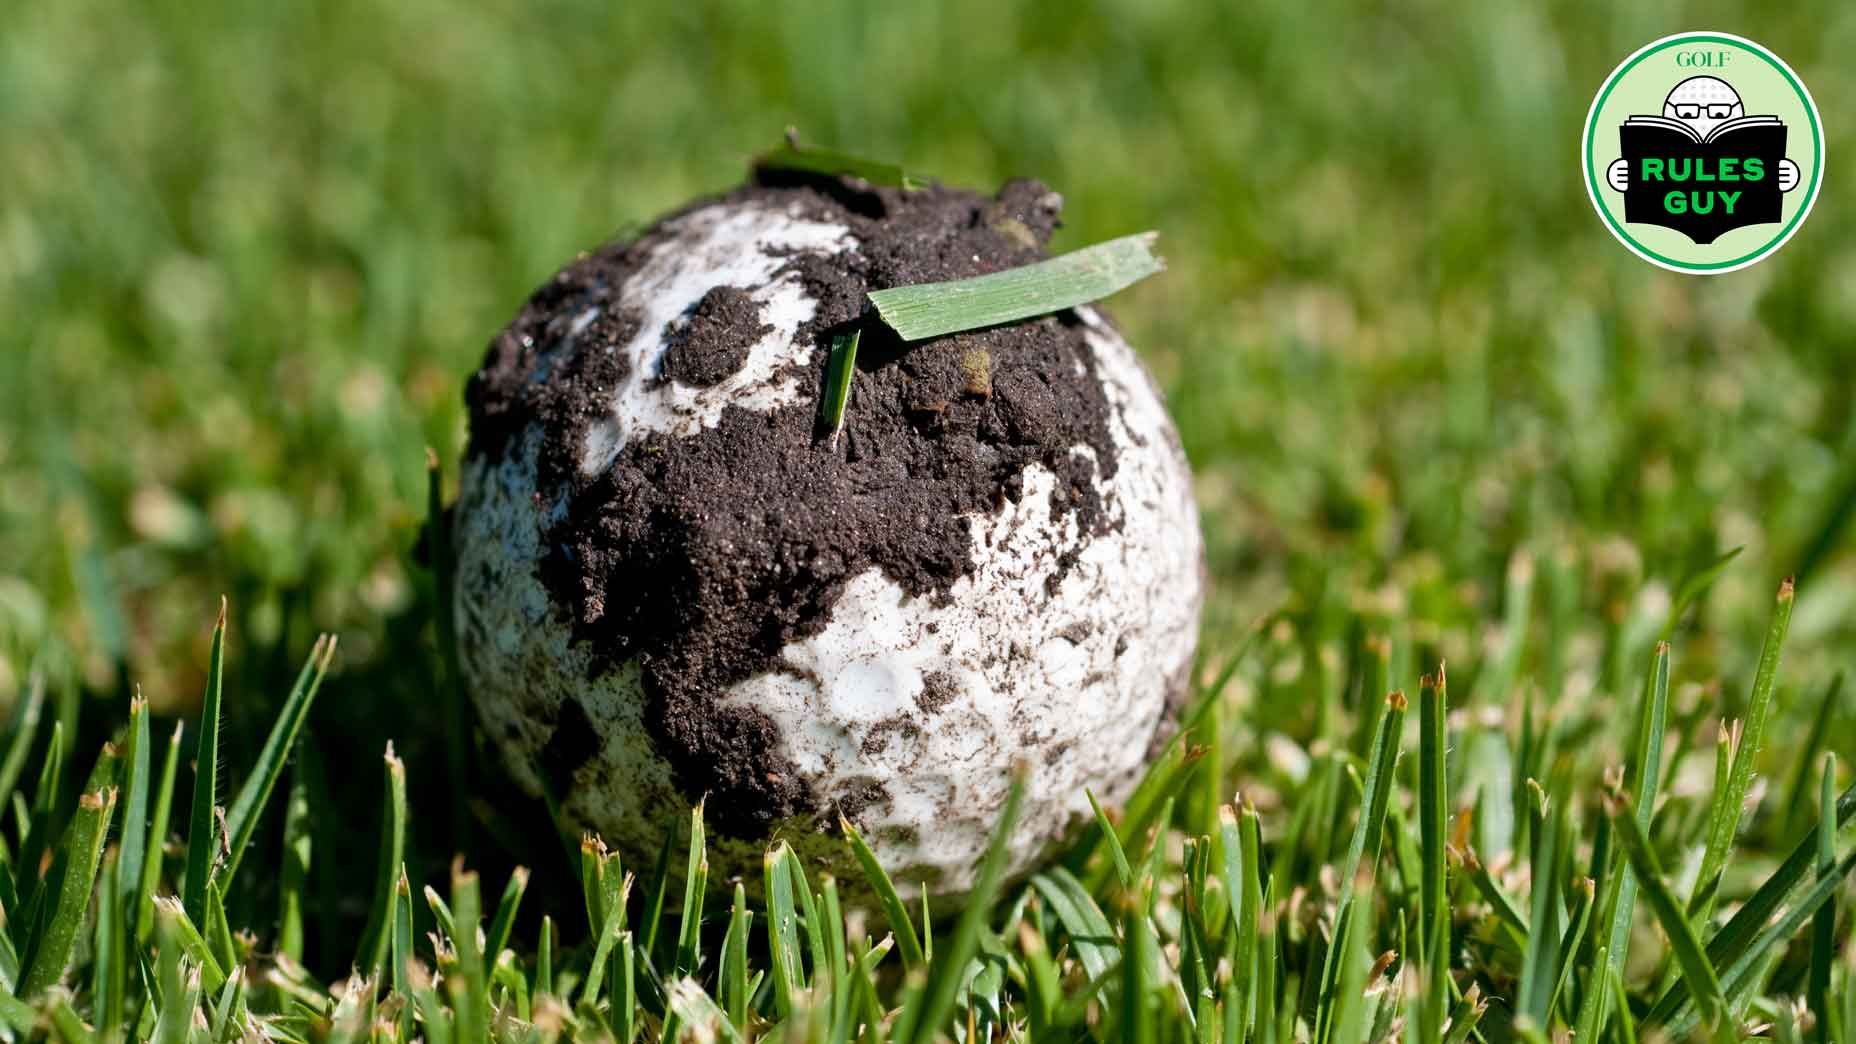 Golf ball that is covered with dirt and grass, possibly from being hit into the rough